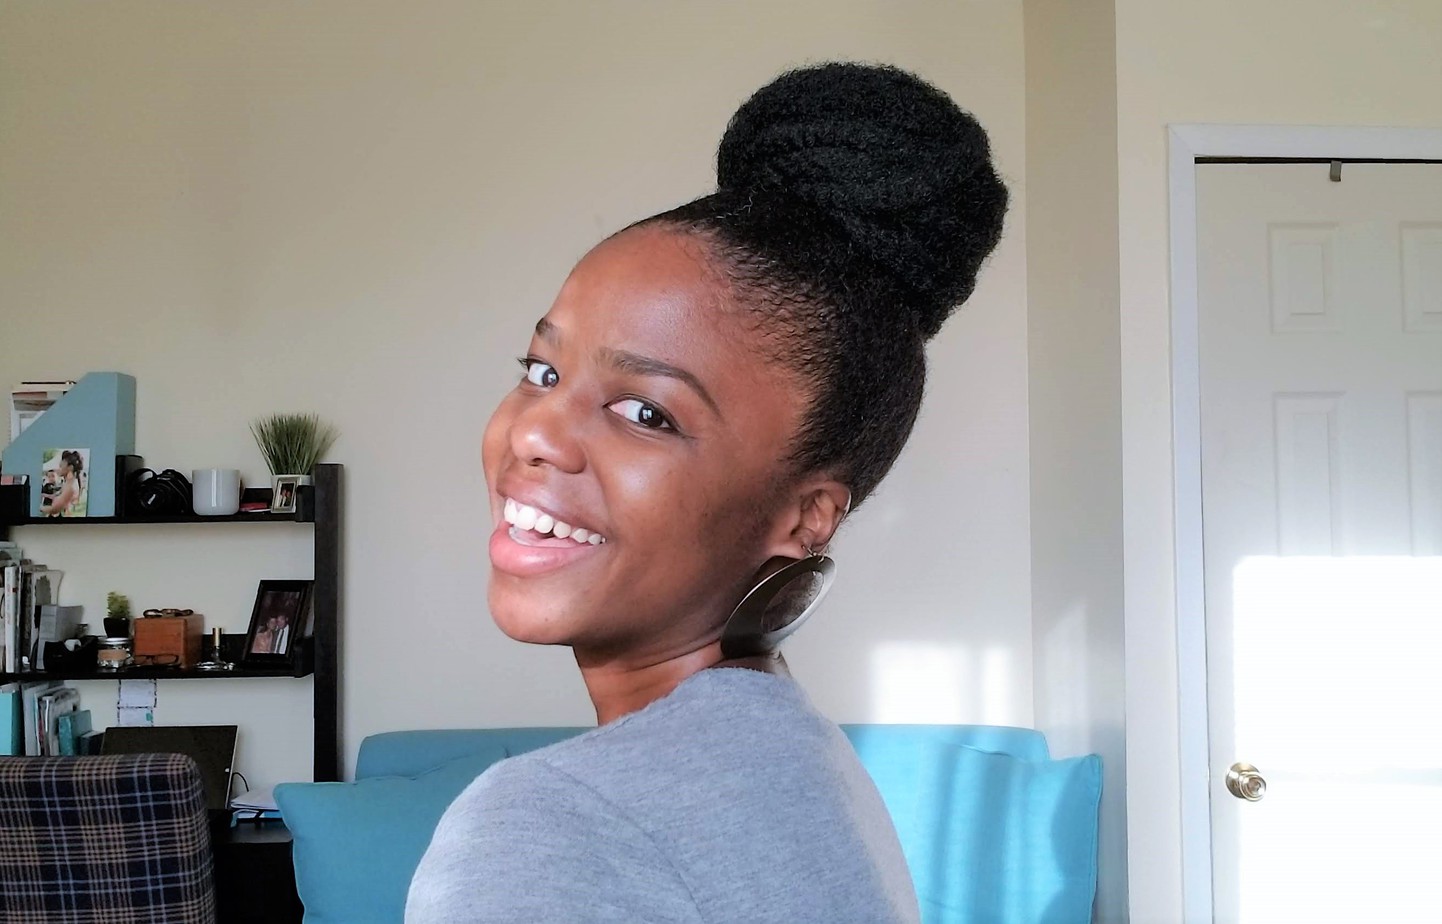 3 Easy Natural Hair Styles to Get You Out the Door Fast